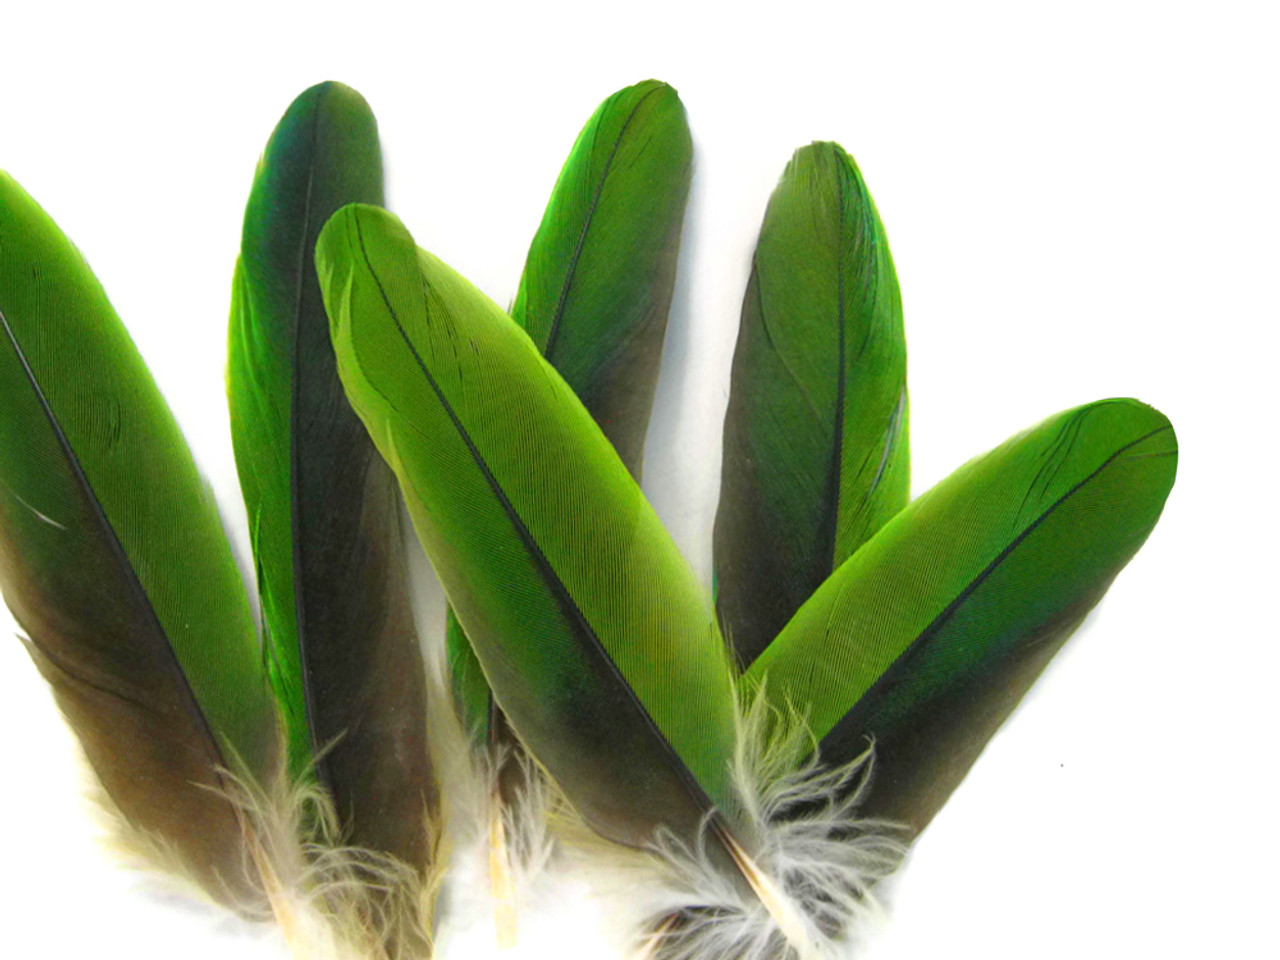 Parrot Feathers, Green  Parrot Wing Feathers - 4 Pieces